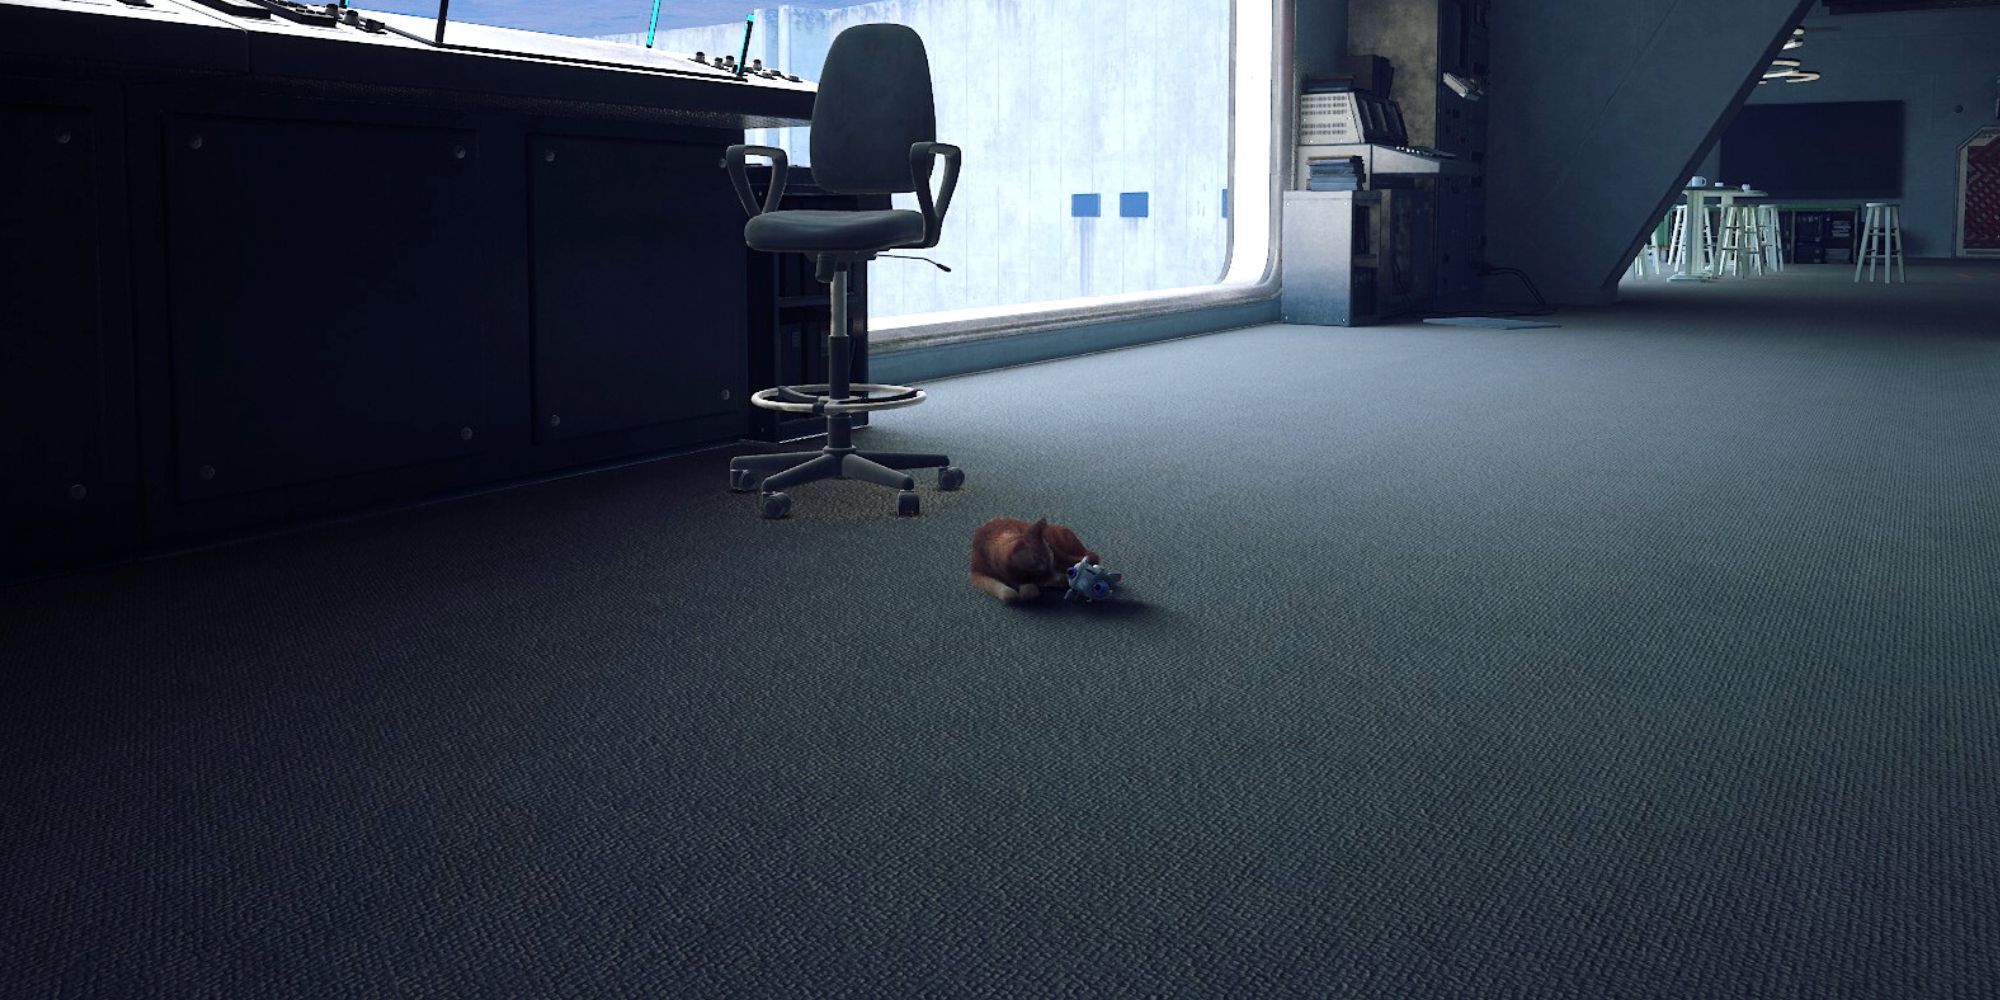 the stray curls up with b12's body on the floor of the control room